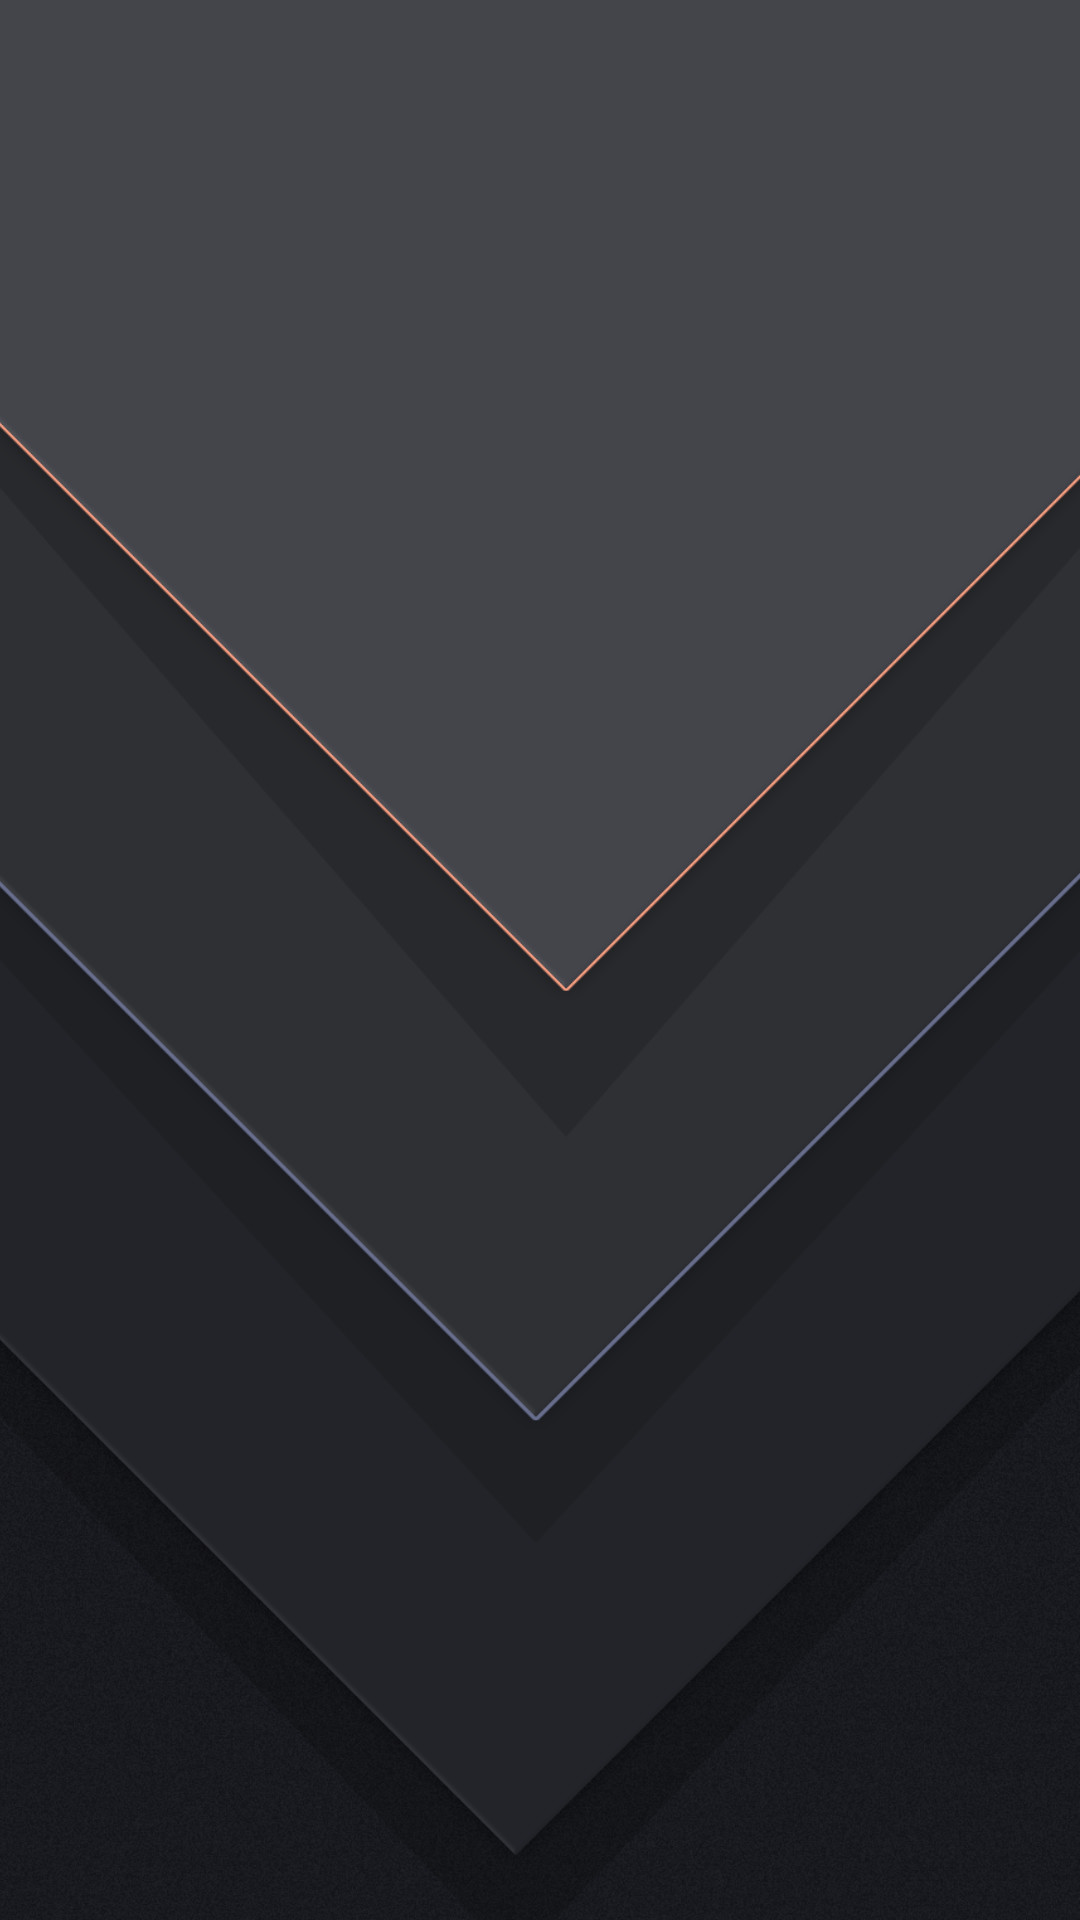 Dark Grey Android Wallpapers